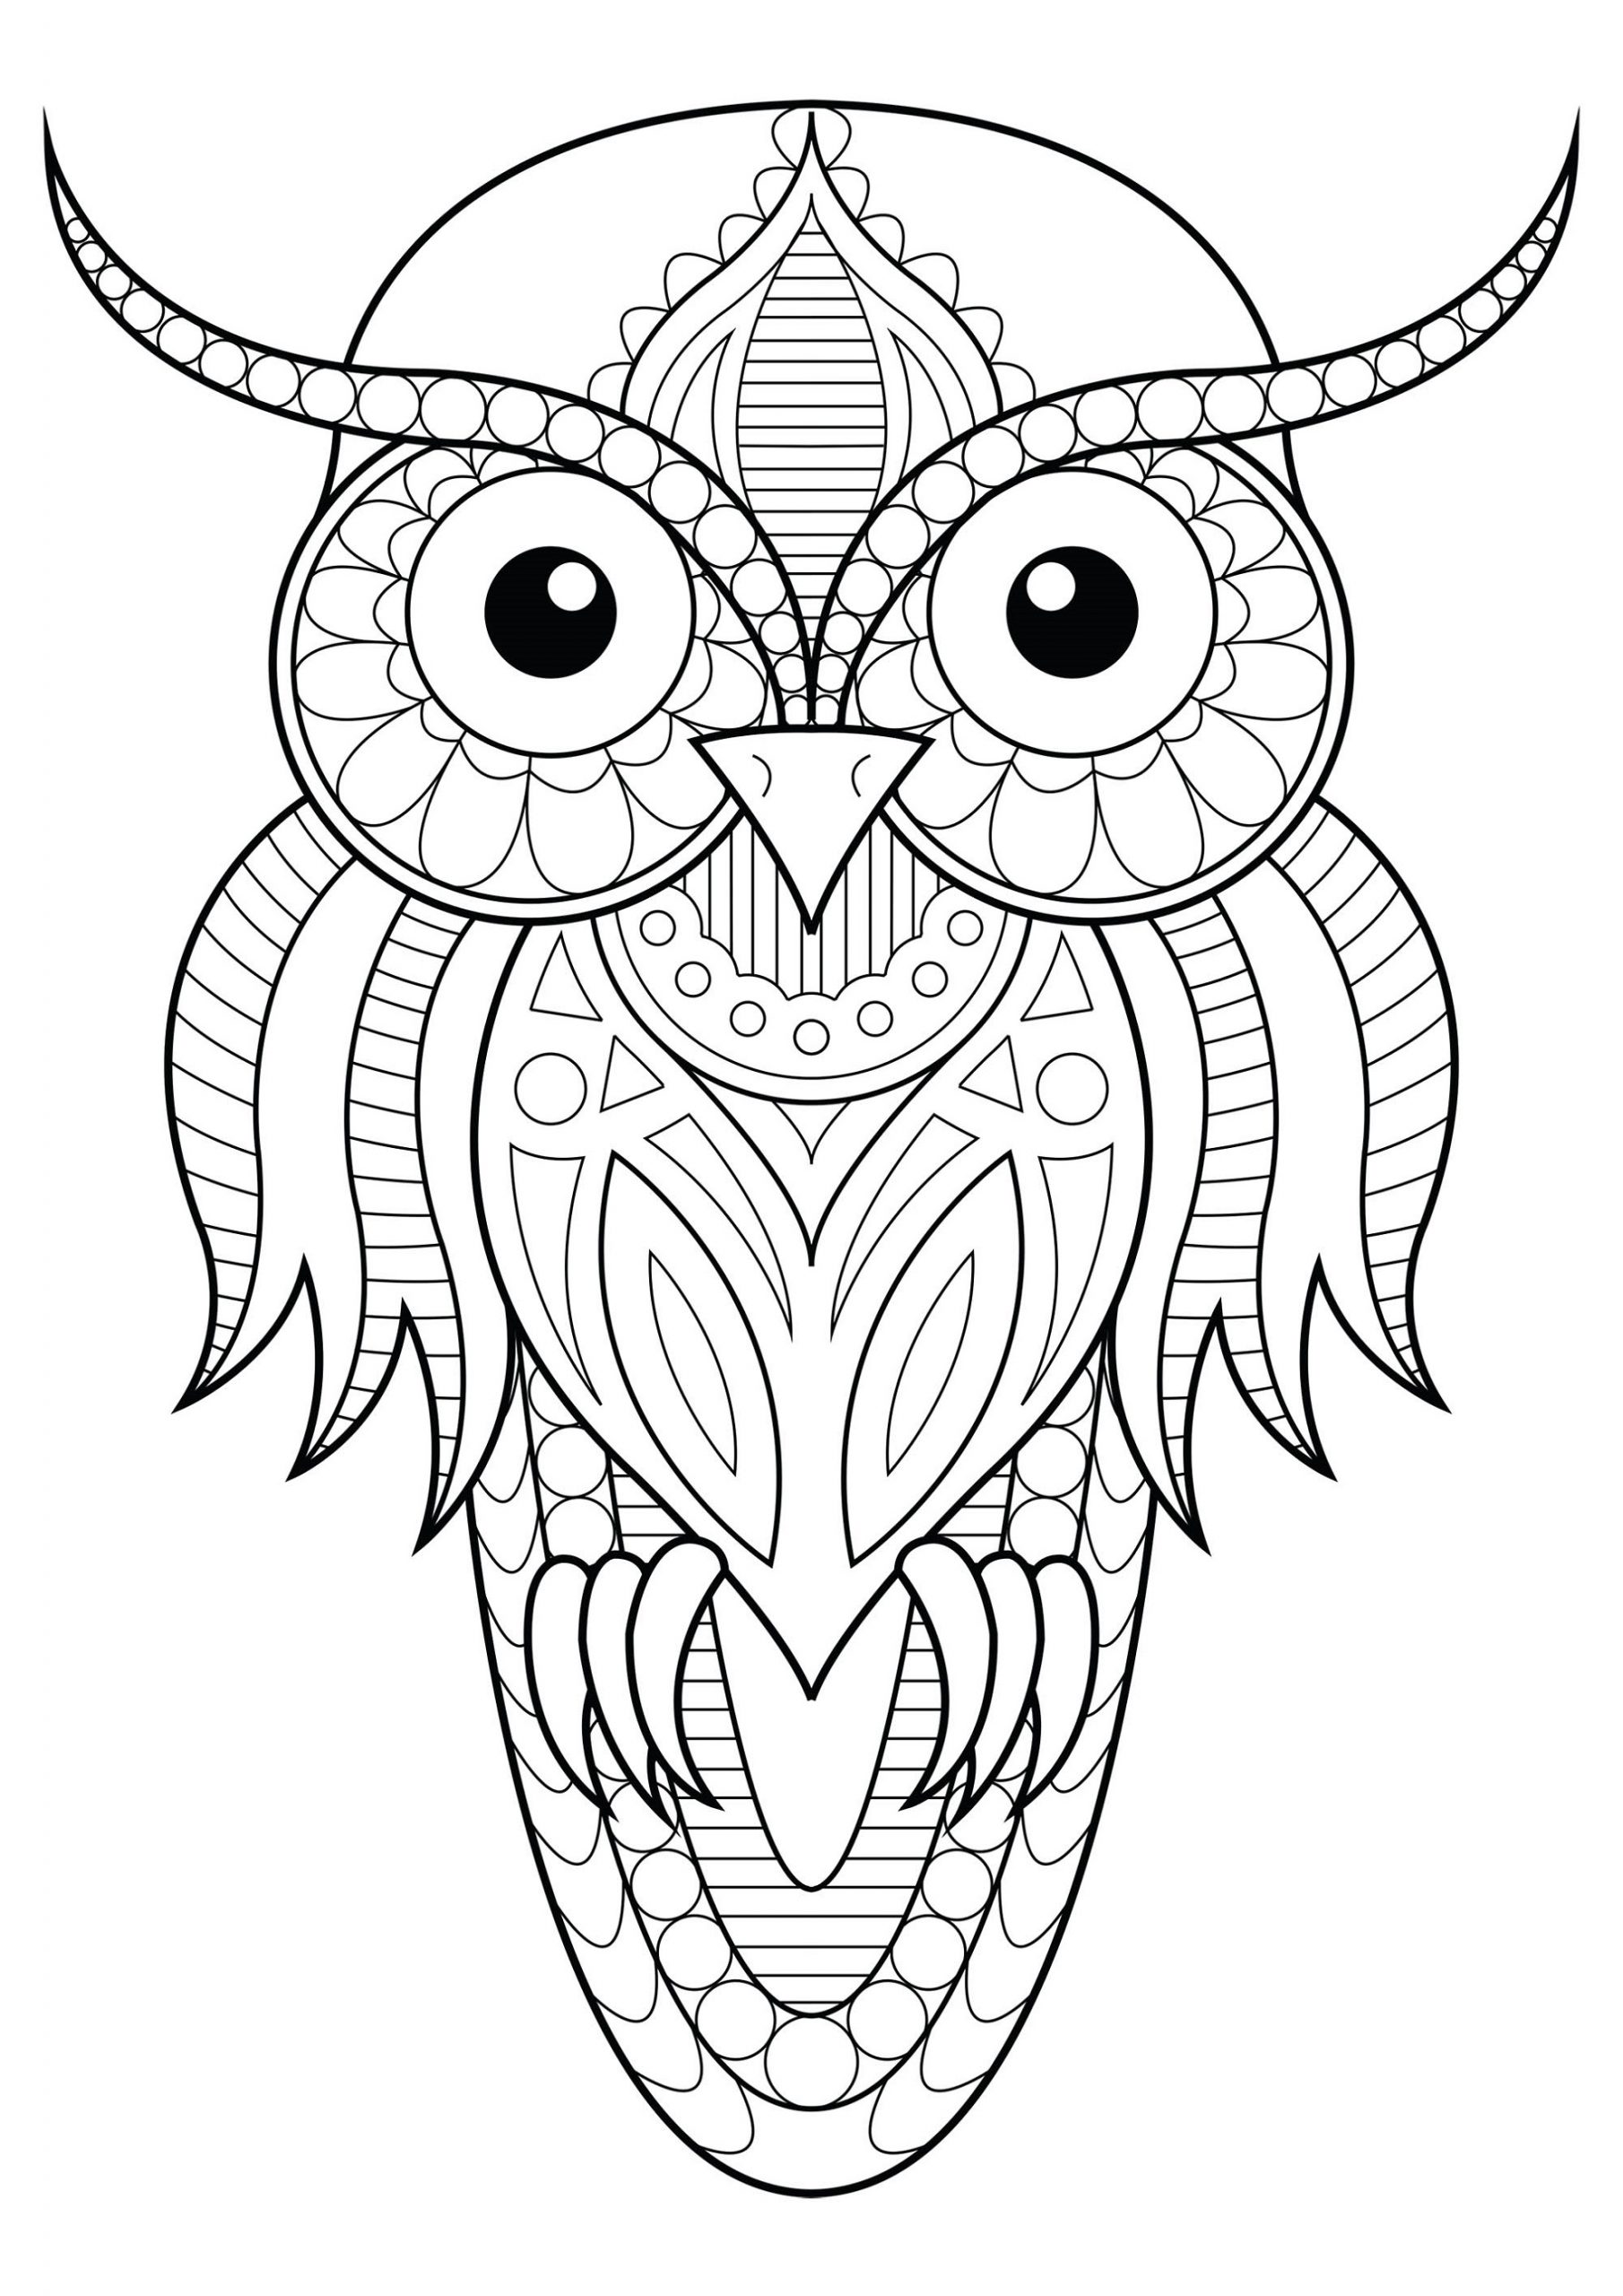 Owl Easy Coloring Pages For Seniors